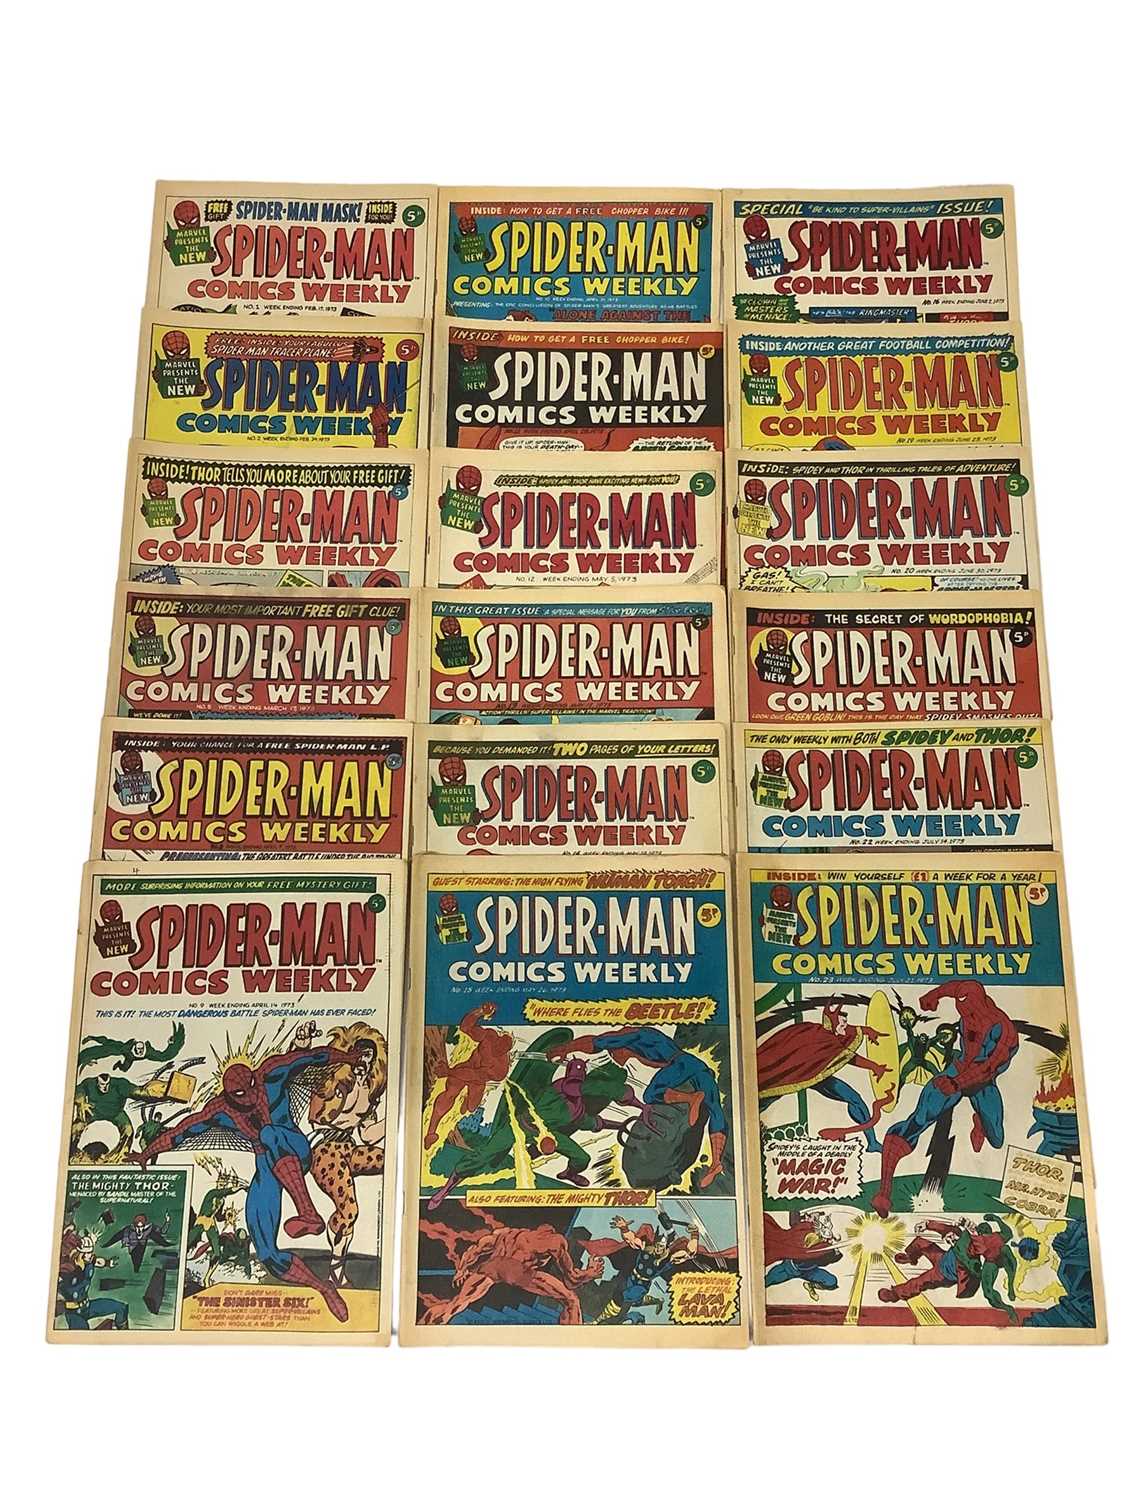 Lot 164 - Collection of marvel comics Spider-Man weekly, February 1973 to July 1973 to include issue 1. Together with the mighty world of marvel weekly comics, some from 1972 and 1973. Approximately